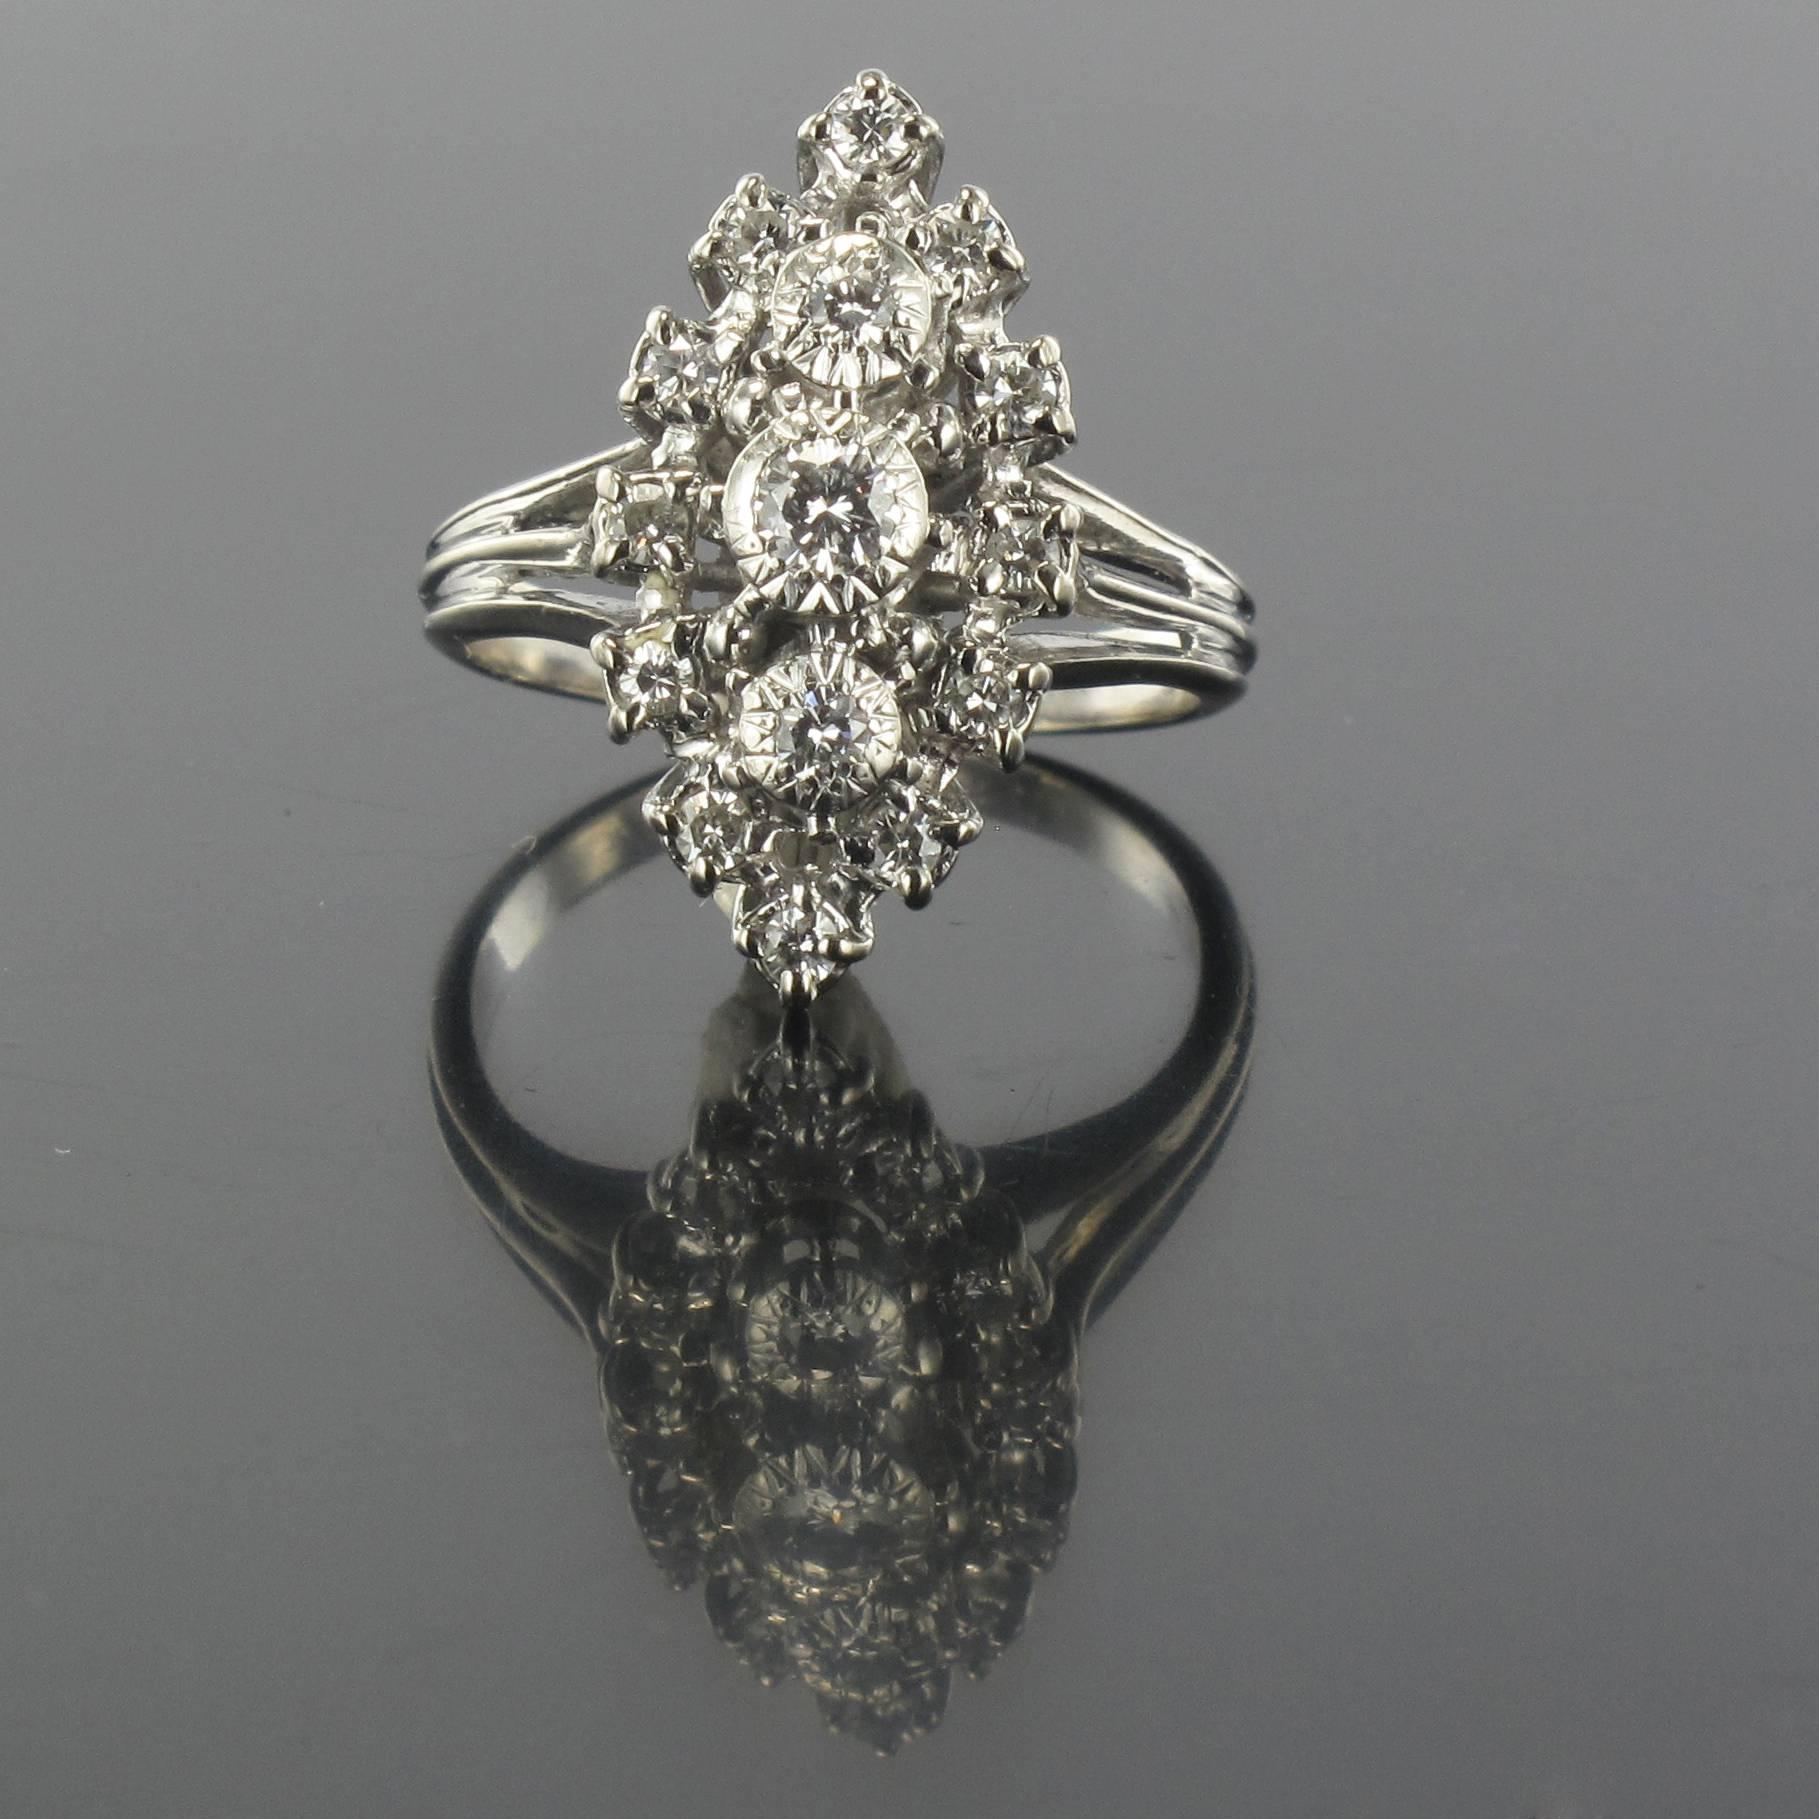 Ring in Platinium and 18 carat white gold, eagle and dog heads hallmarks. 

This antique marquise ring is bezel set with 3 modern brilliant cut diamonds in a star design. The one in the centre is larger. These diamonds are surrounded with 12 other